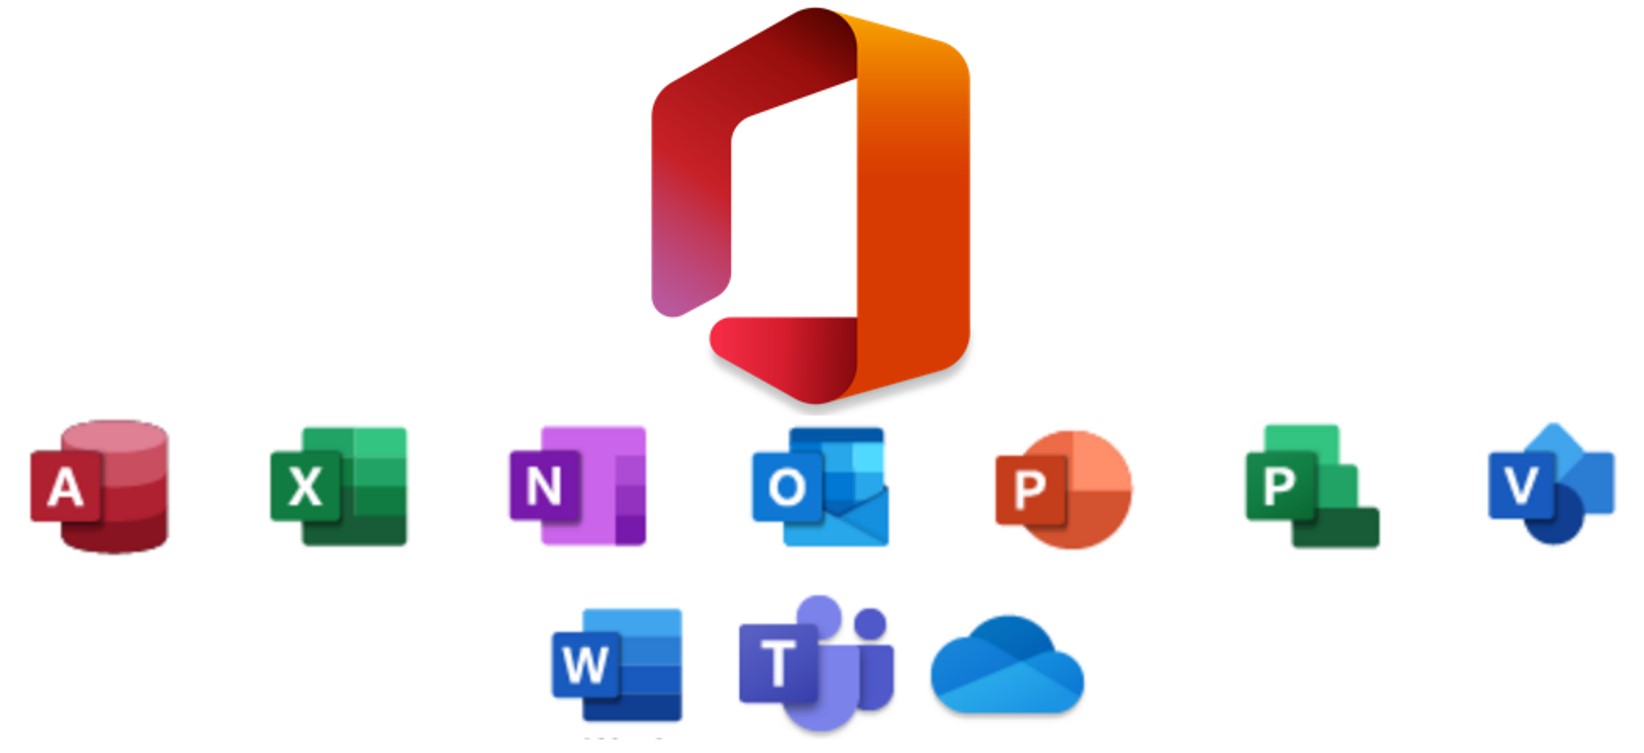 all the Microsoft Office icons